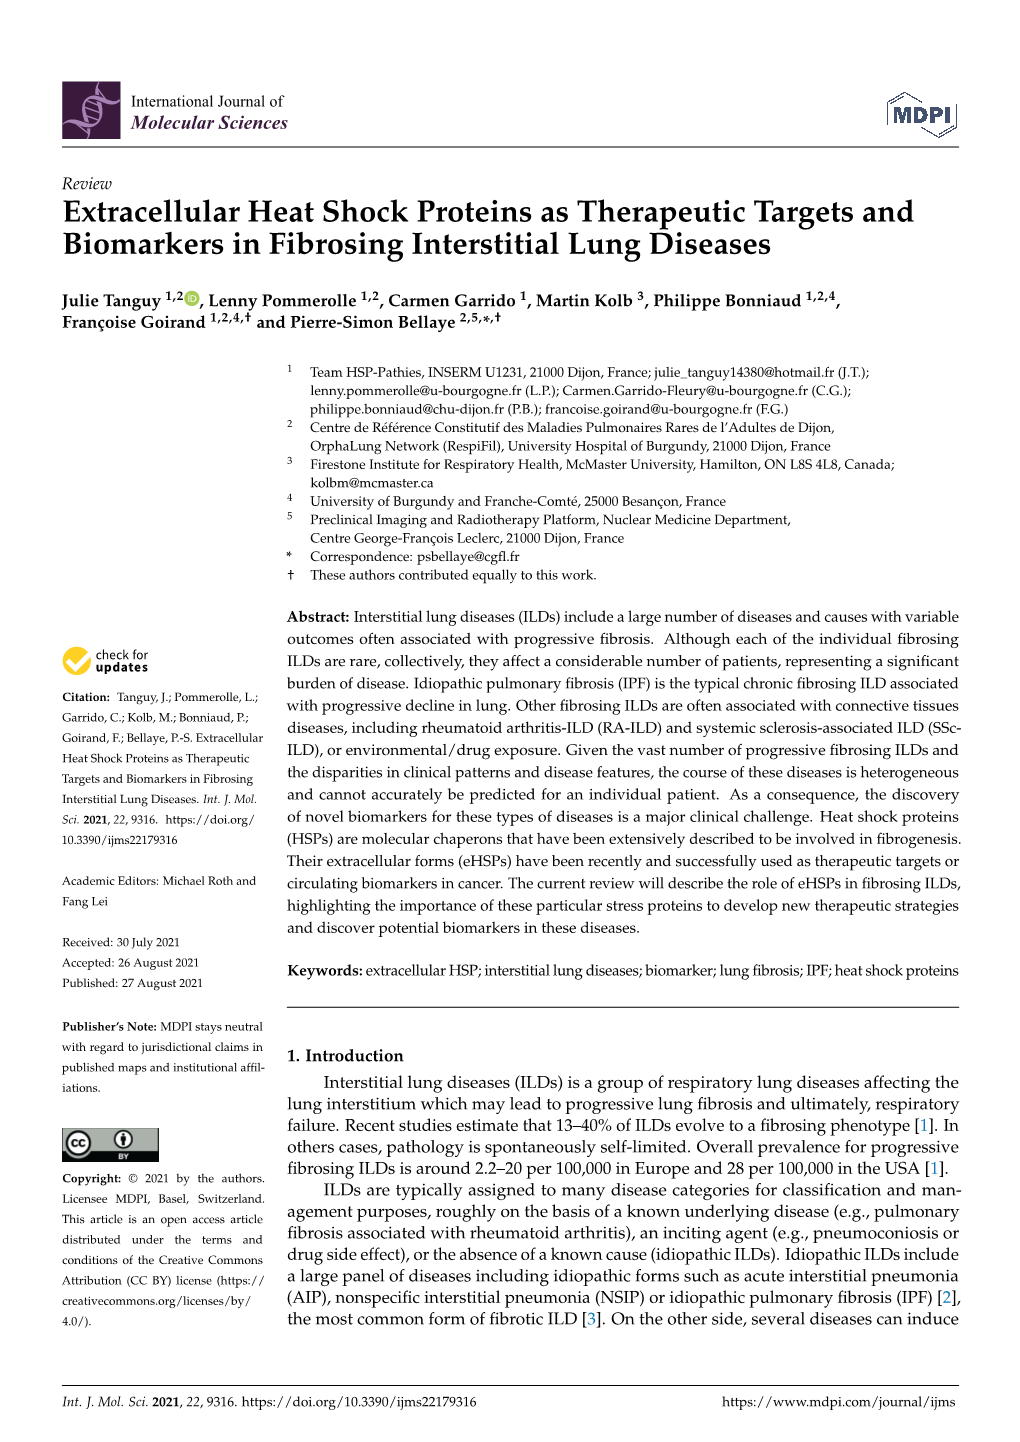 Extracellular Heat Shock Proteins As Therapeutic Targets and Biomarkers in Fibrosing Interstitial Lung Diseases